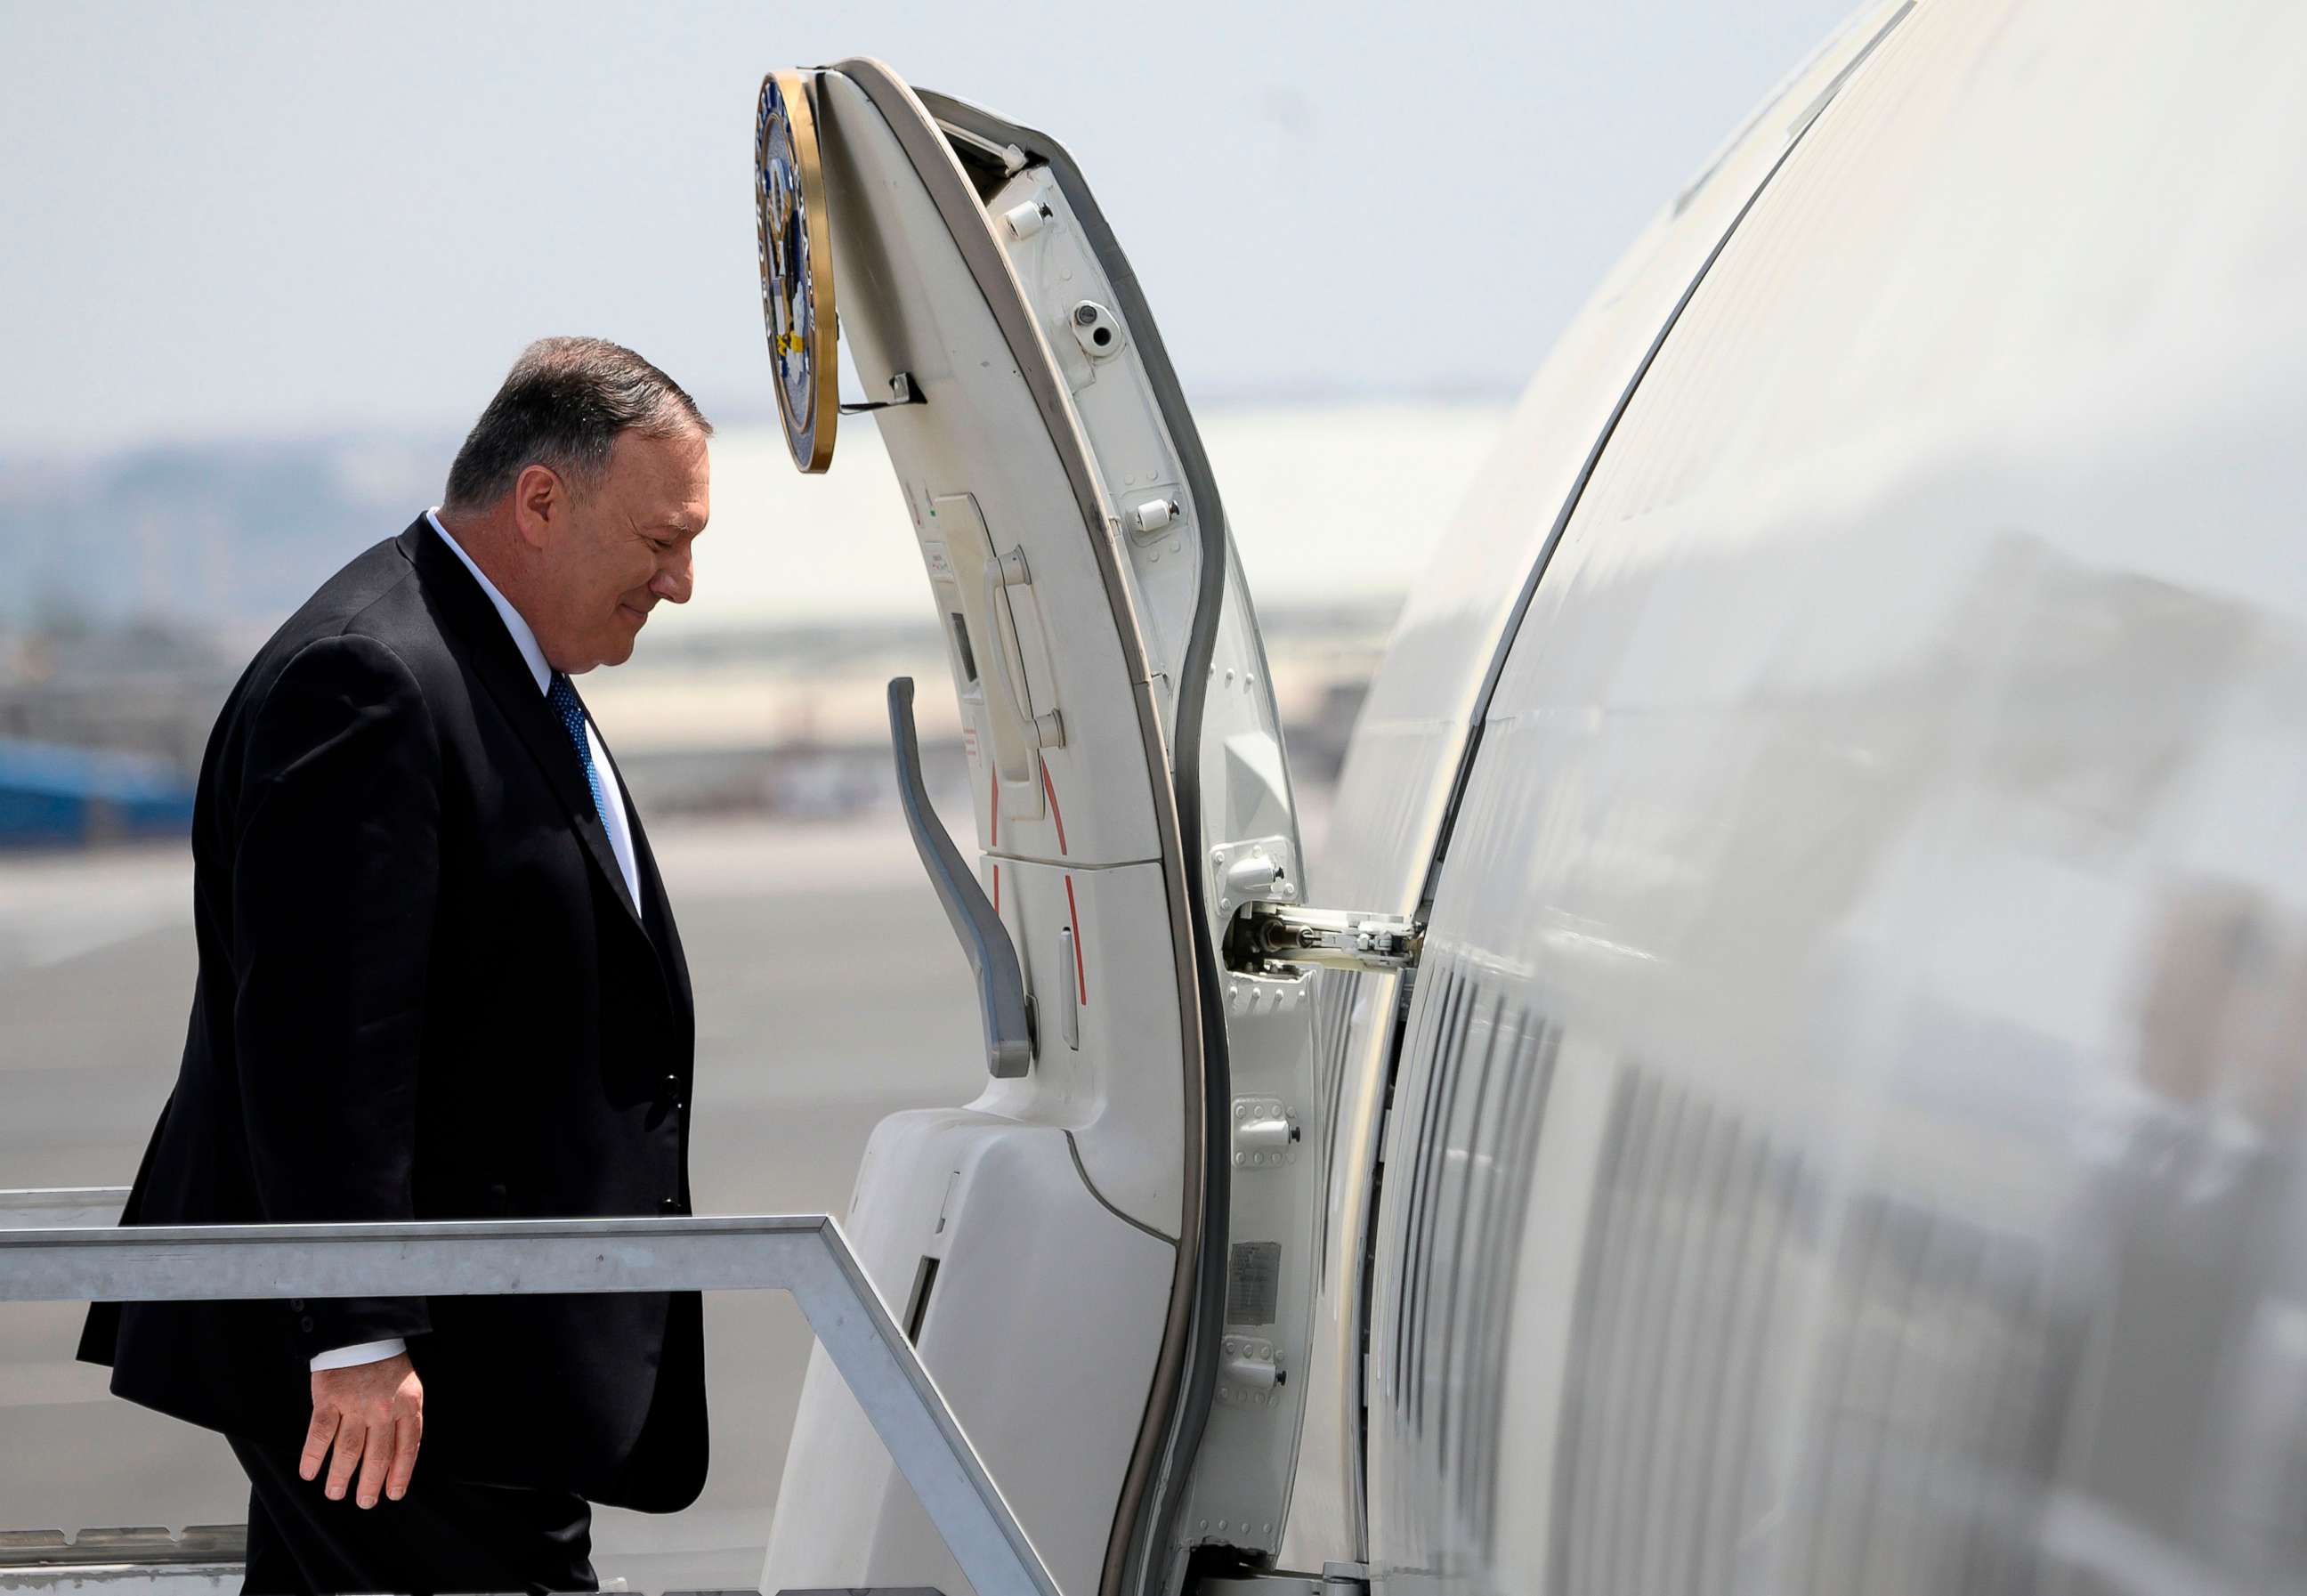 PHOTO: Secretary of State Mike Pompeo enters the plane before departing from the Addis Ababa Bole international Airport in Addis Ababa on Feb. 19, 2020.